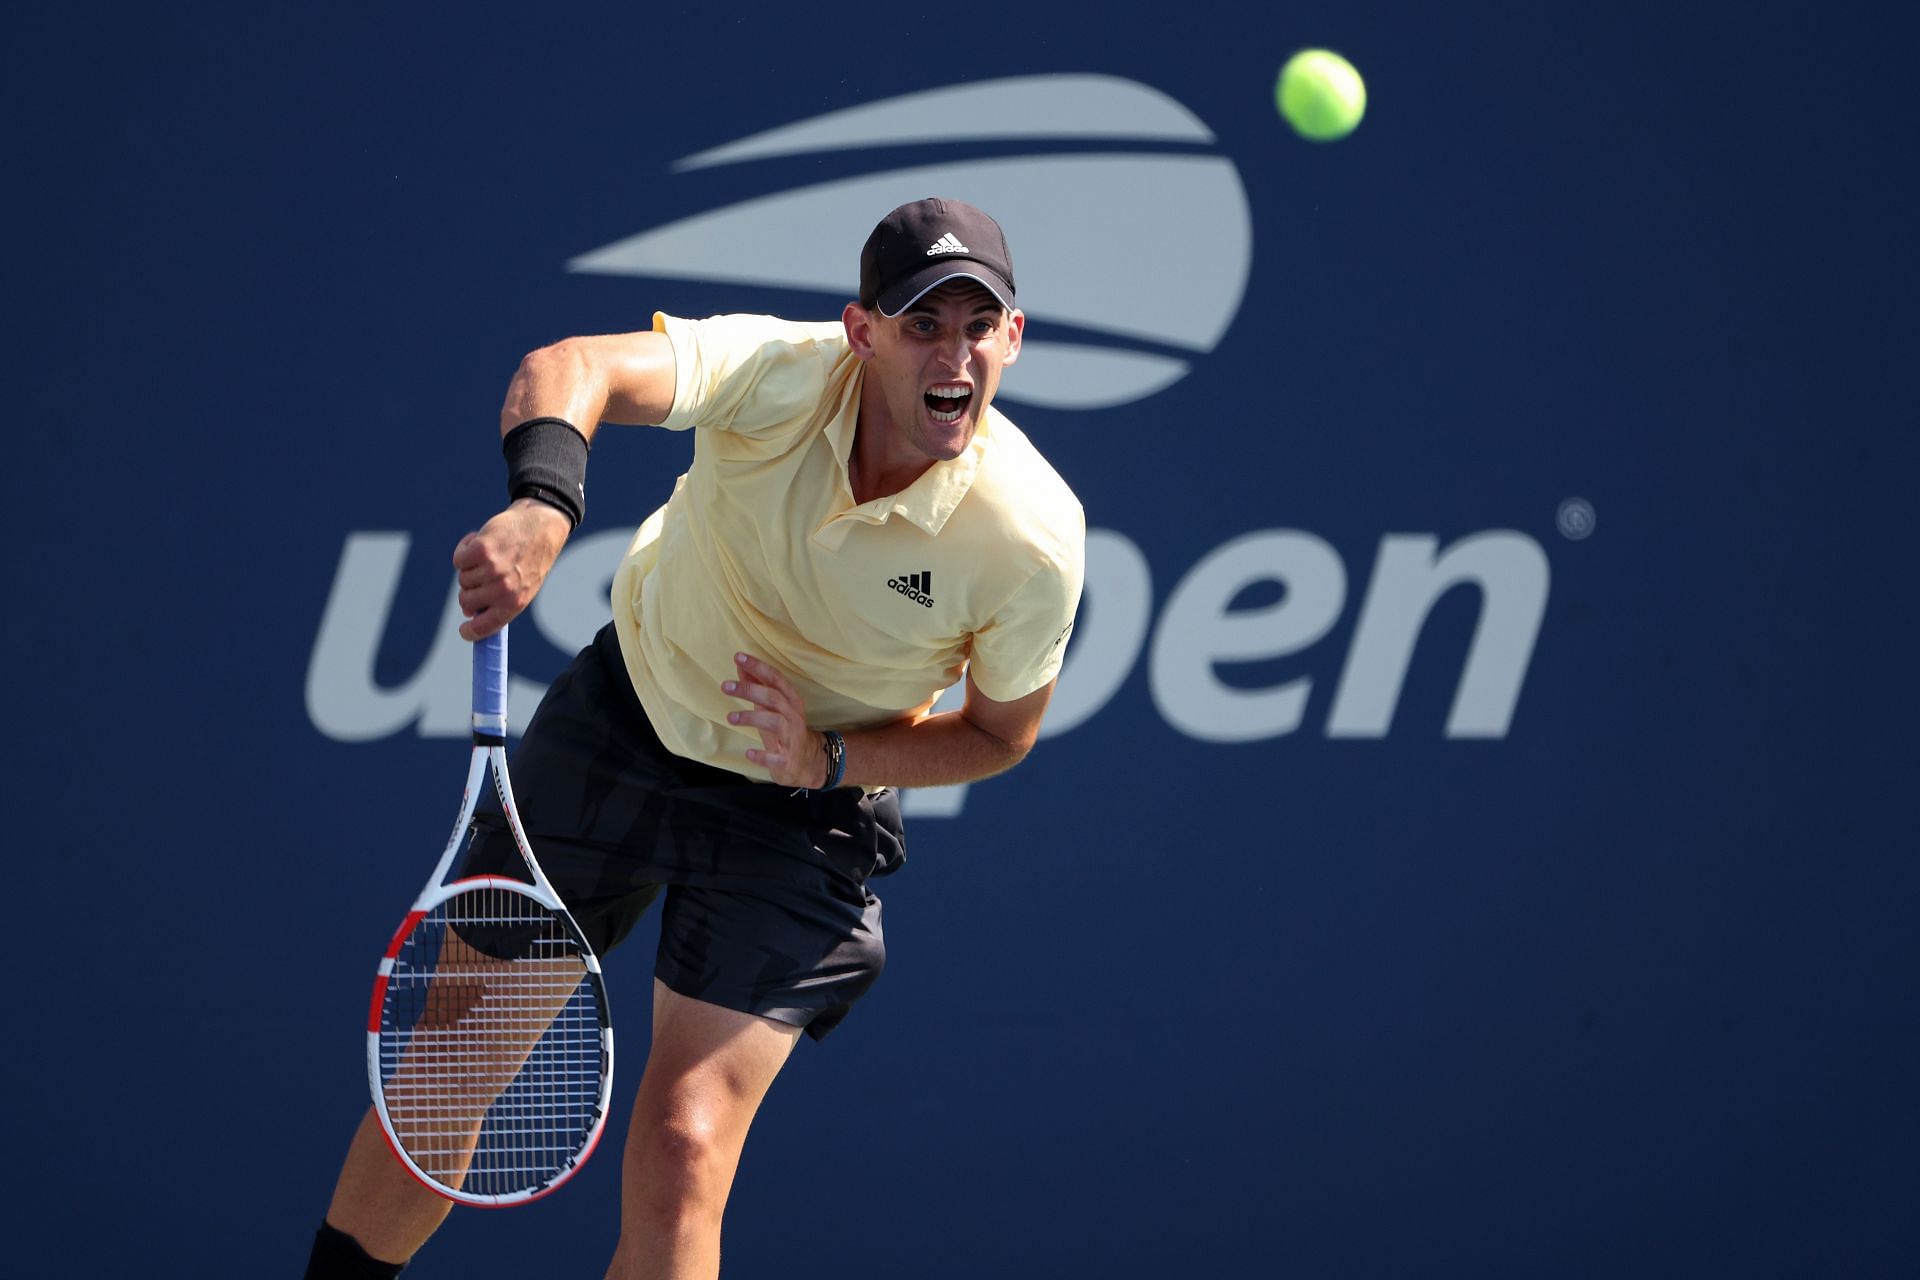 Dominic Thiem entered the main draw of the San Diego Open by using a protective ranking